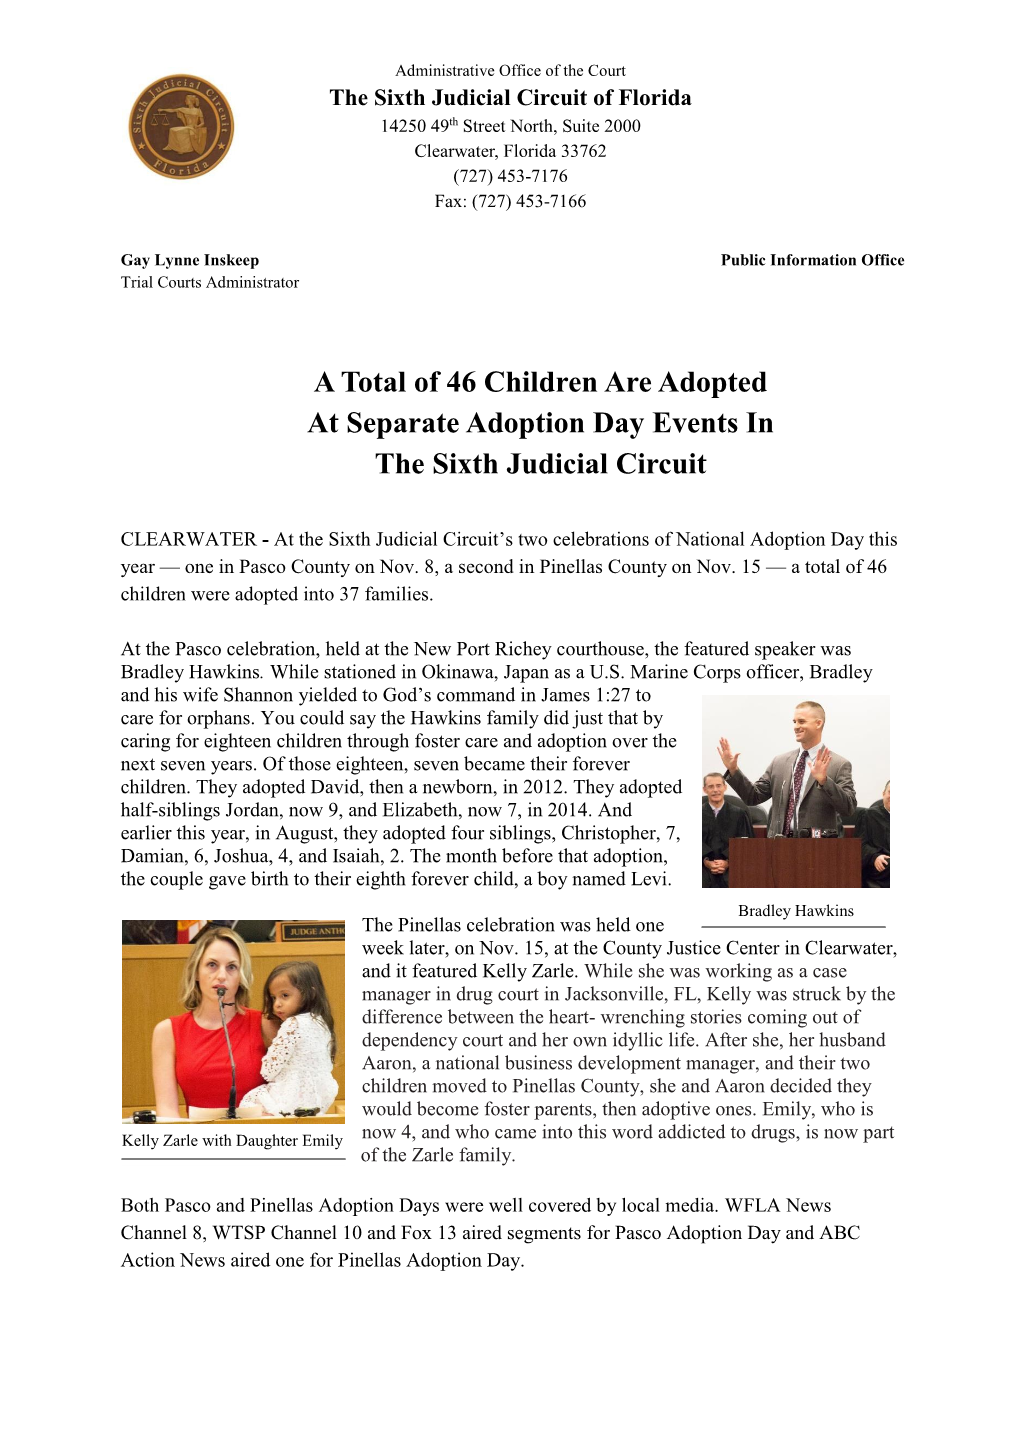 A Total of 46 Children Are Adopted at Separate Adoption Day Events in the Sixth Judicial Circuit